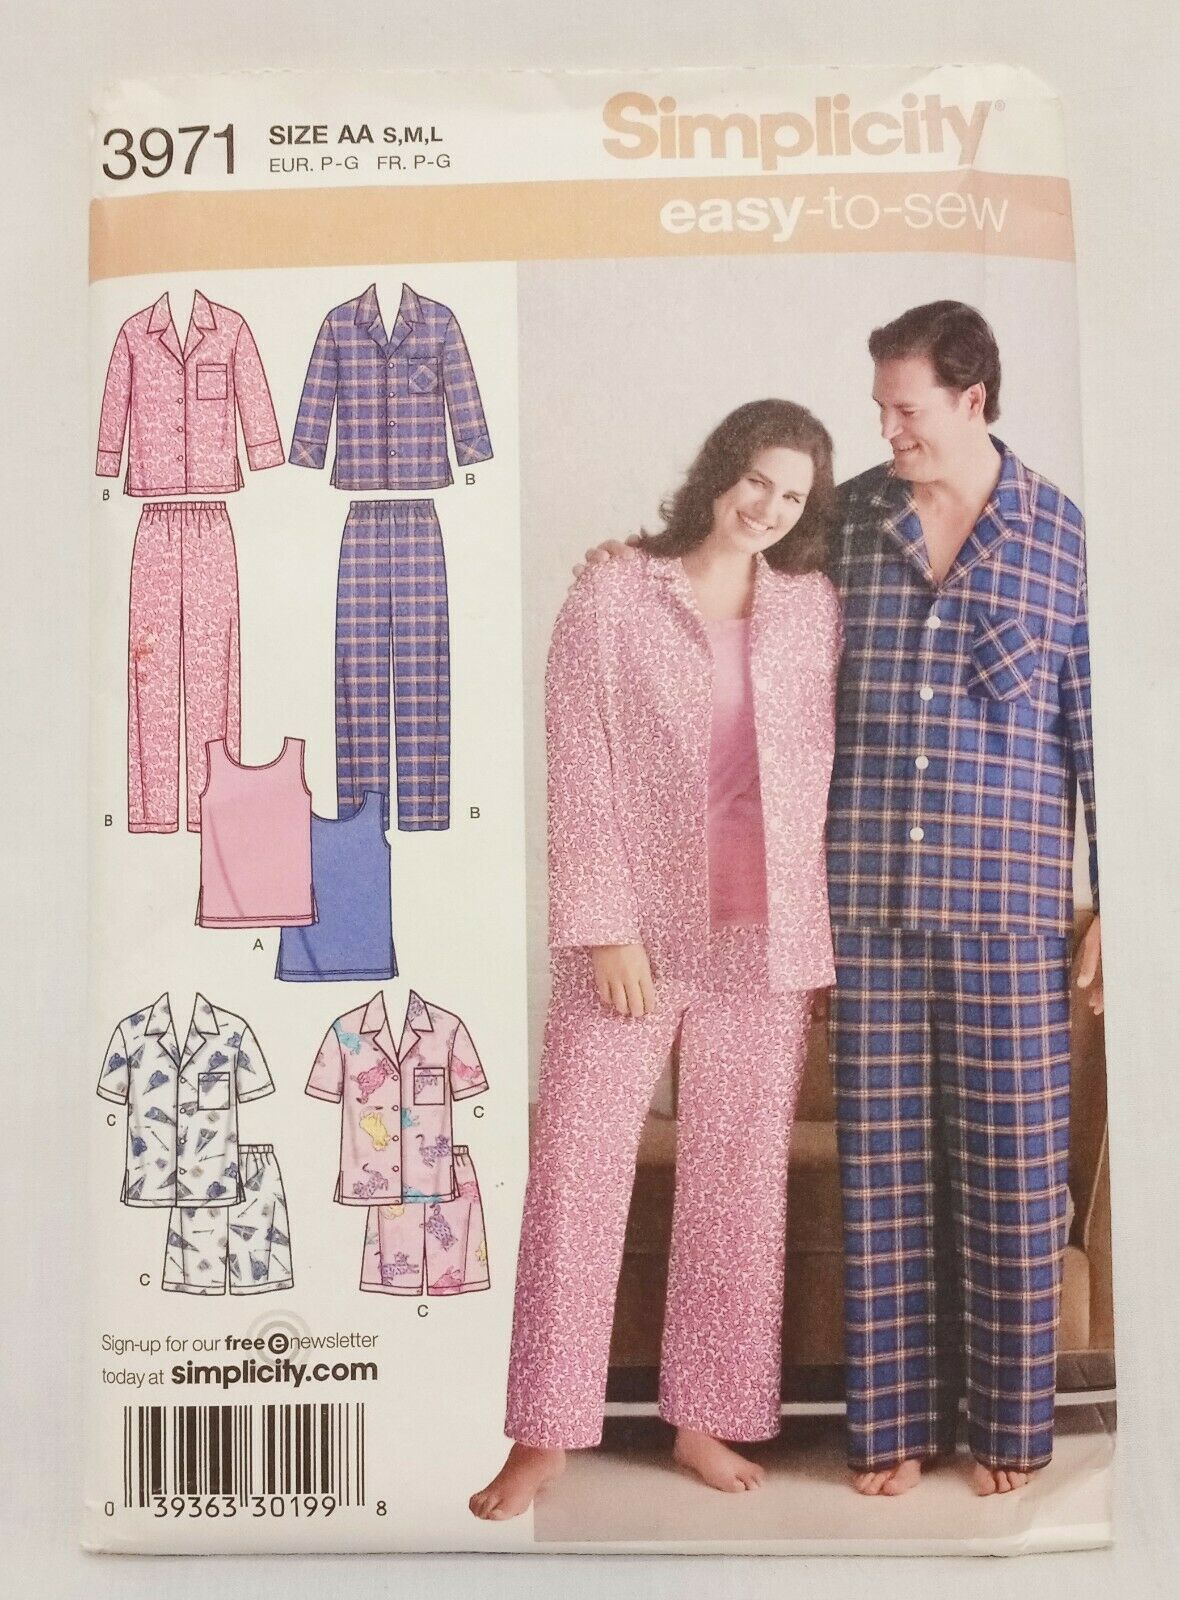 Primary image for Women and Men Pajamas Two Lengths Size AA S M L Bust 40-50 Simplicity 3971